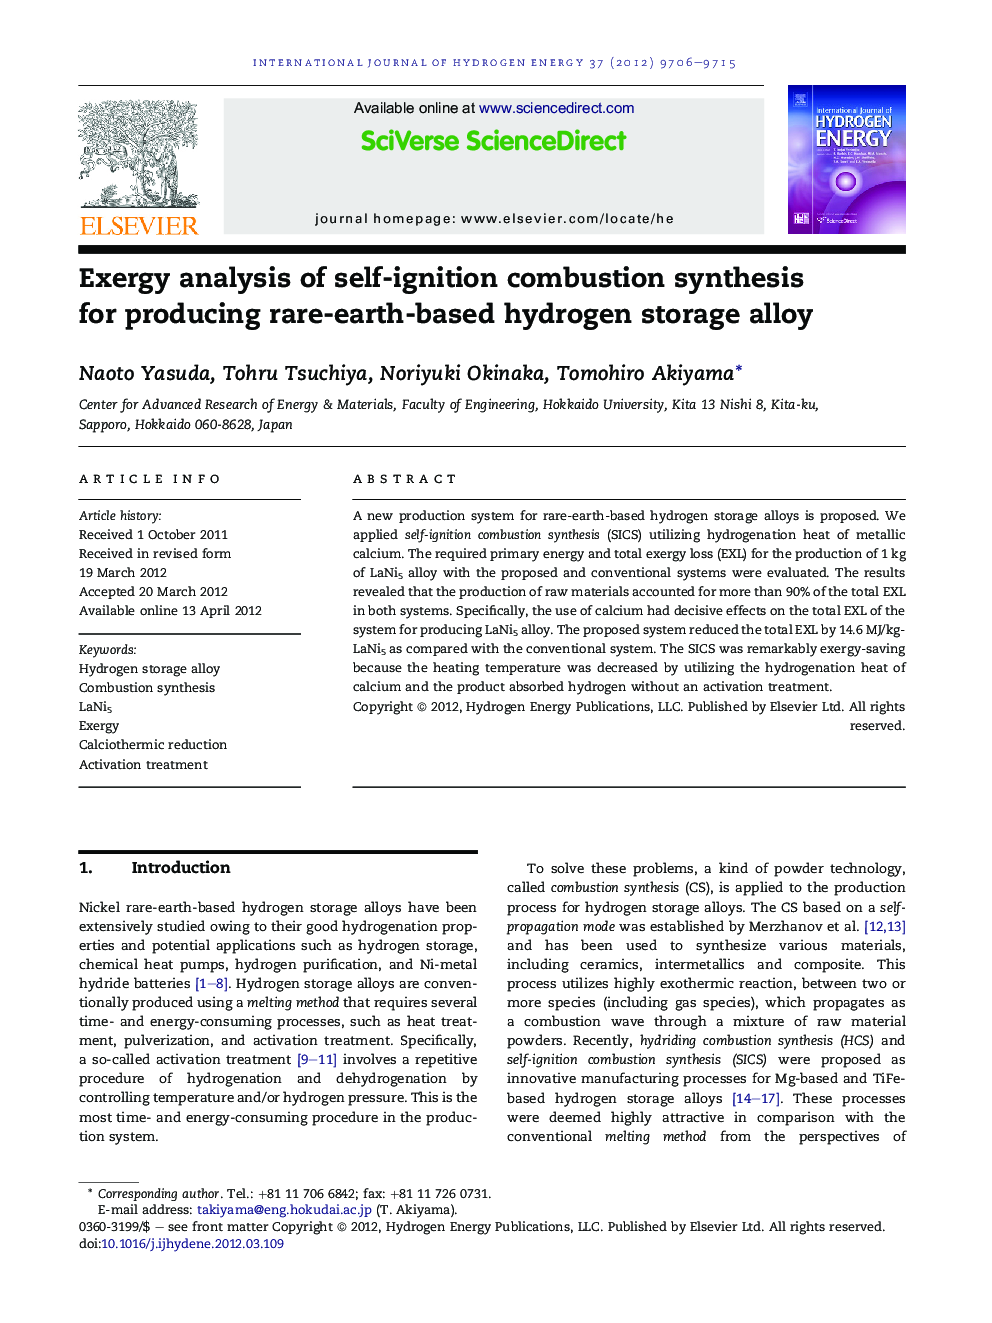 Exergy analysis of self-ignition combustion synthesis for producing rare-earth-based hydrogen storage alloy